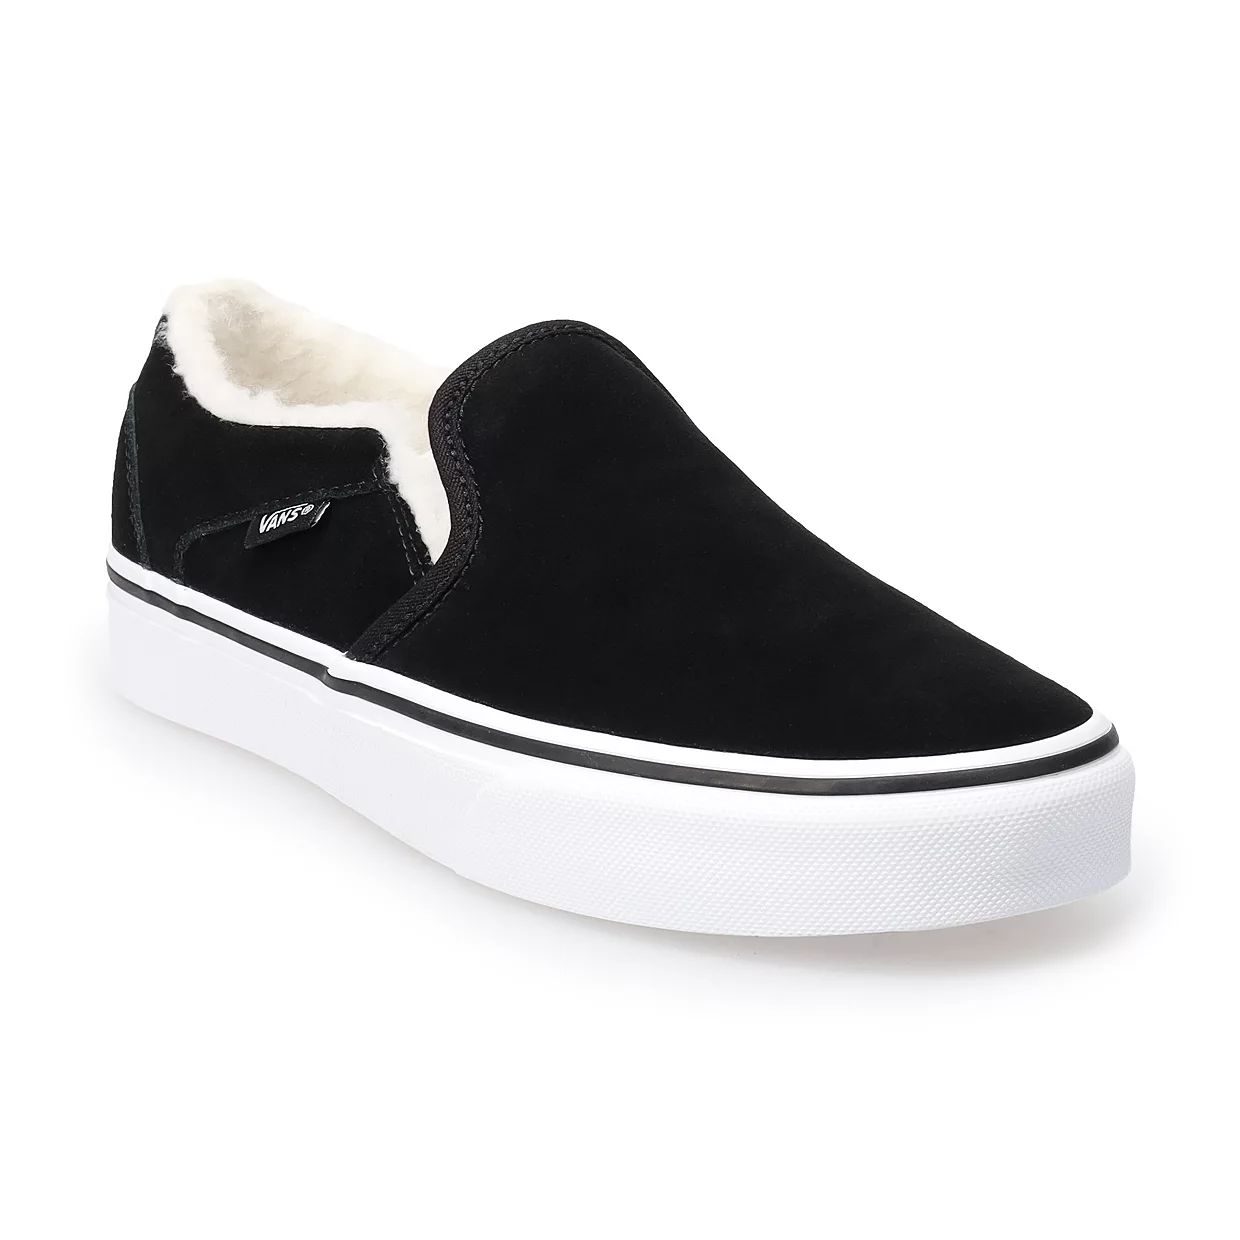 Vans® Asher Women's Suede Slip-On Shoes | Kohl's